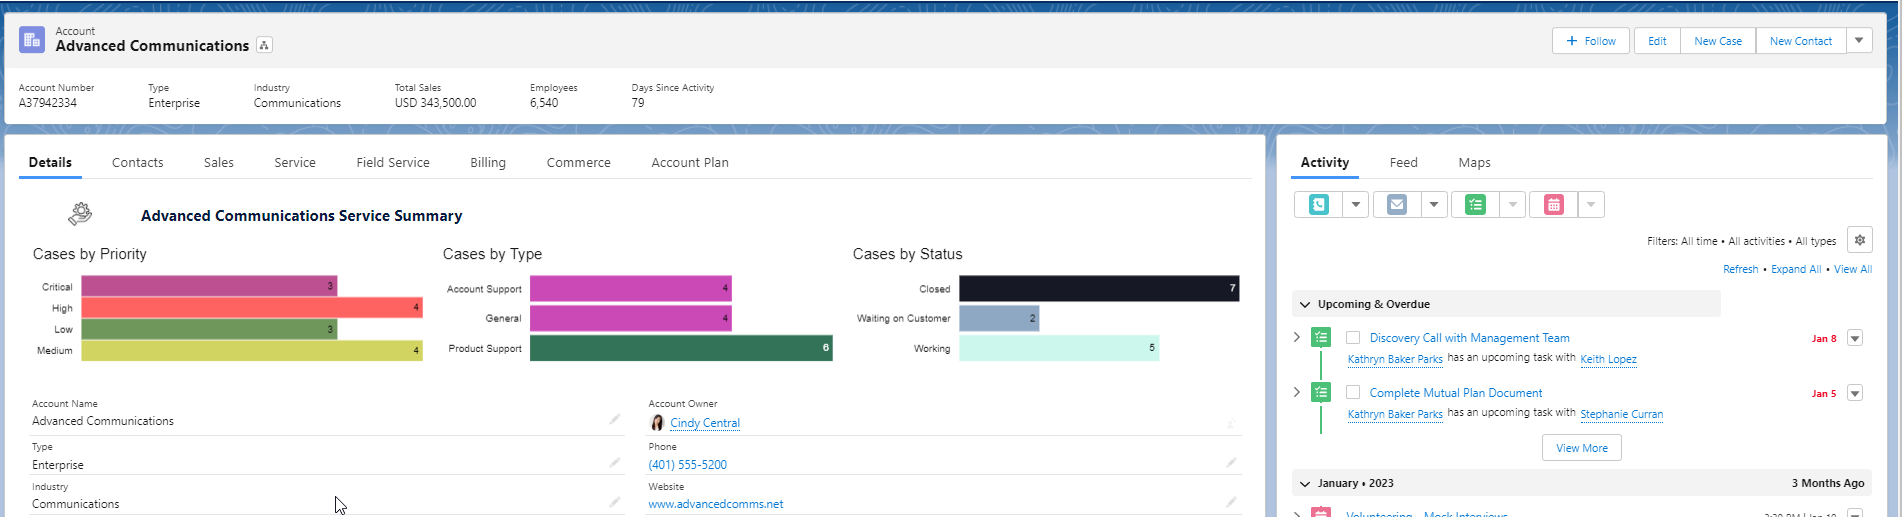 Embedded CRM Analytics Dashboard on Account Page